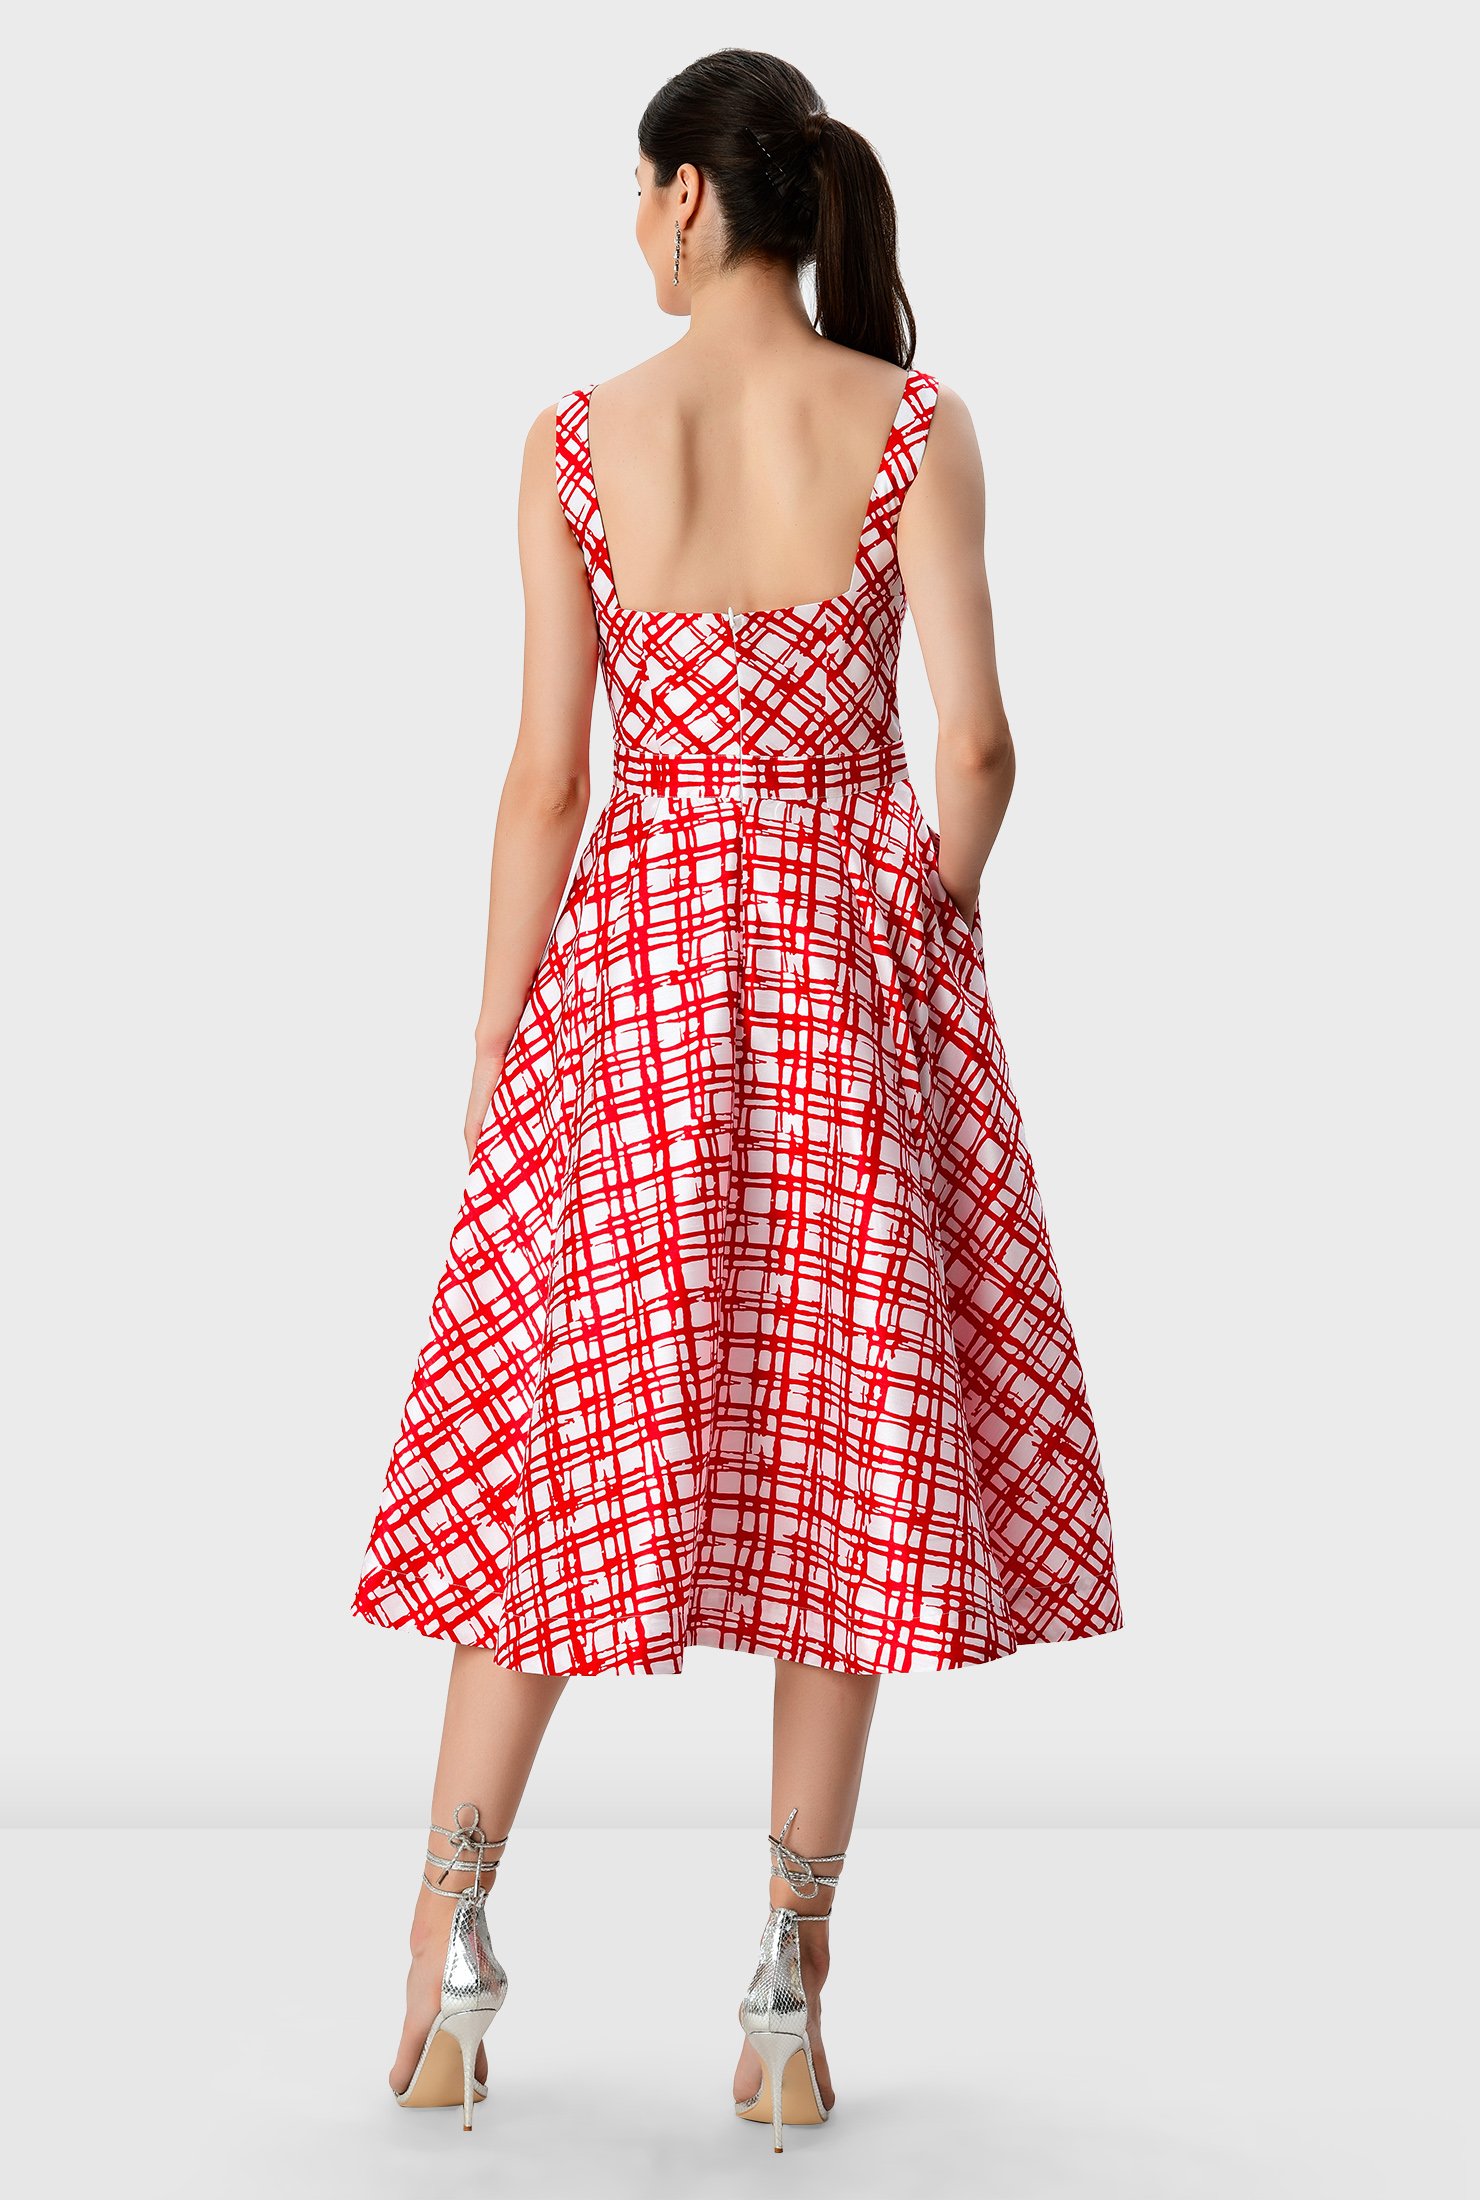 Our fit-and-flare dress in check-print dupioni is styled with a full skirt for that feminine swish, while a pleated surplice bodice creates a flattering shape.